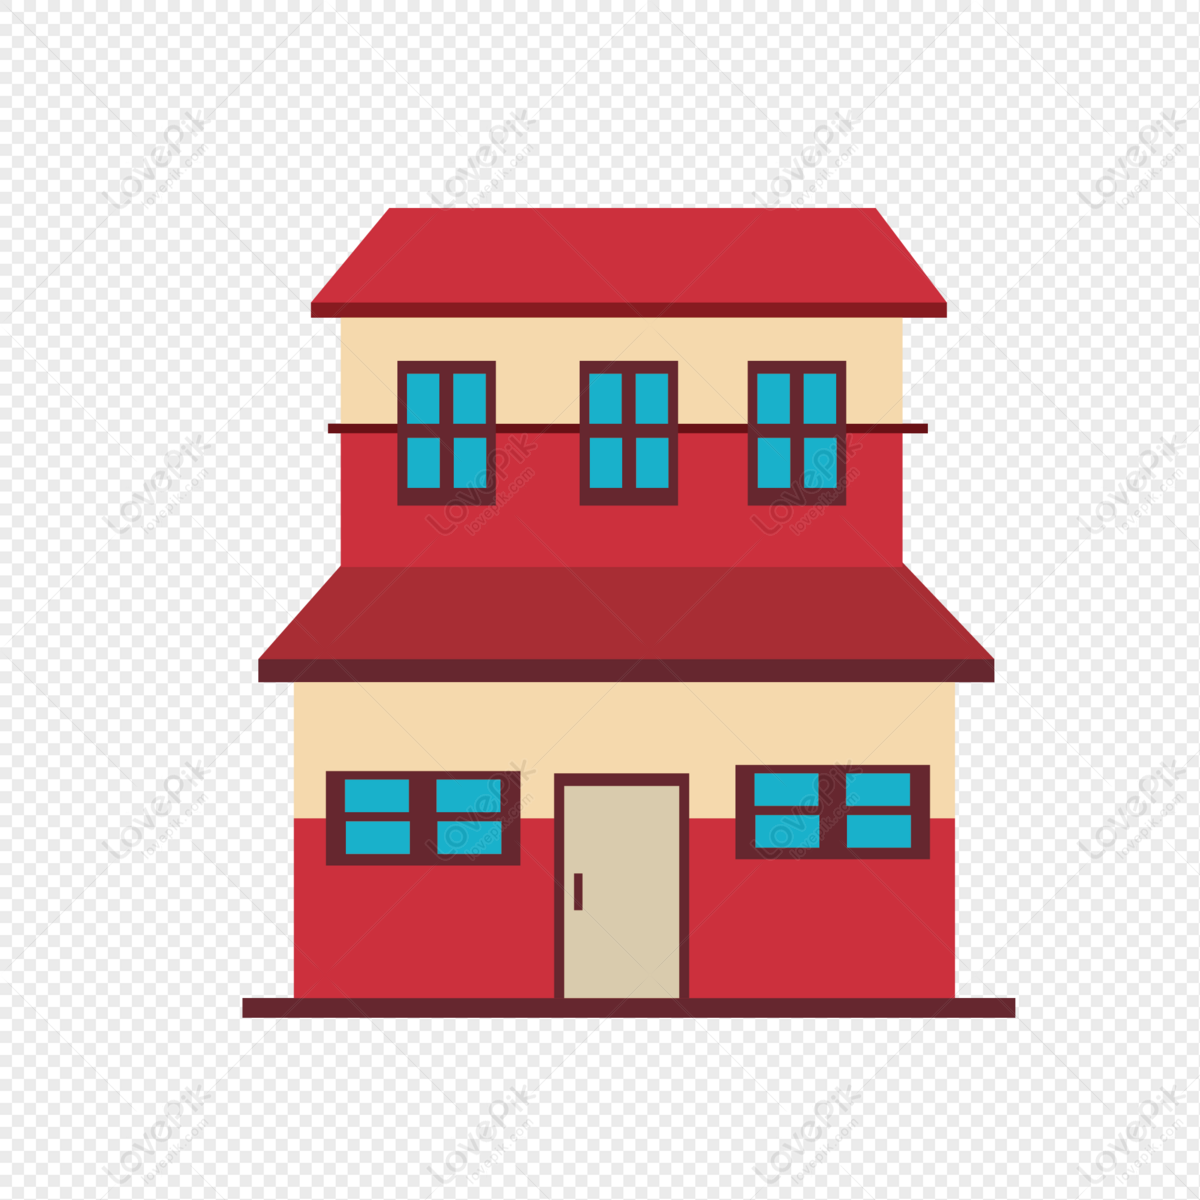 Red House PNG Hd Transparent Image And Clipart Image For Free ...